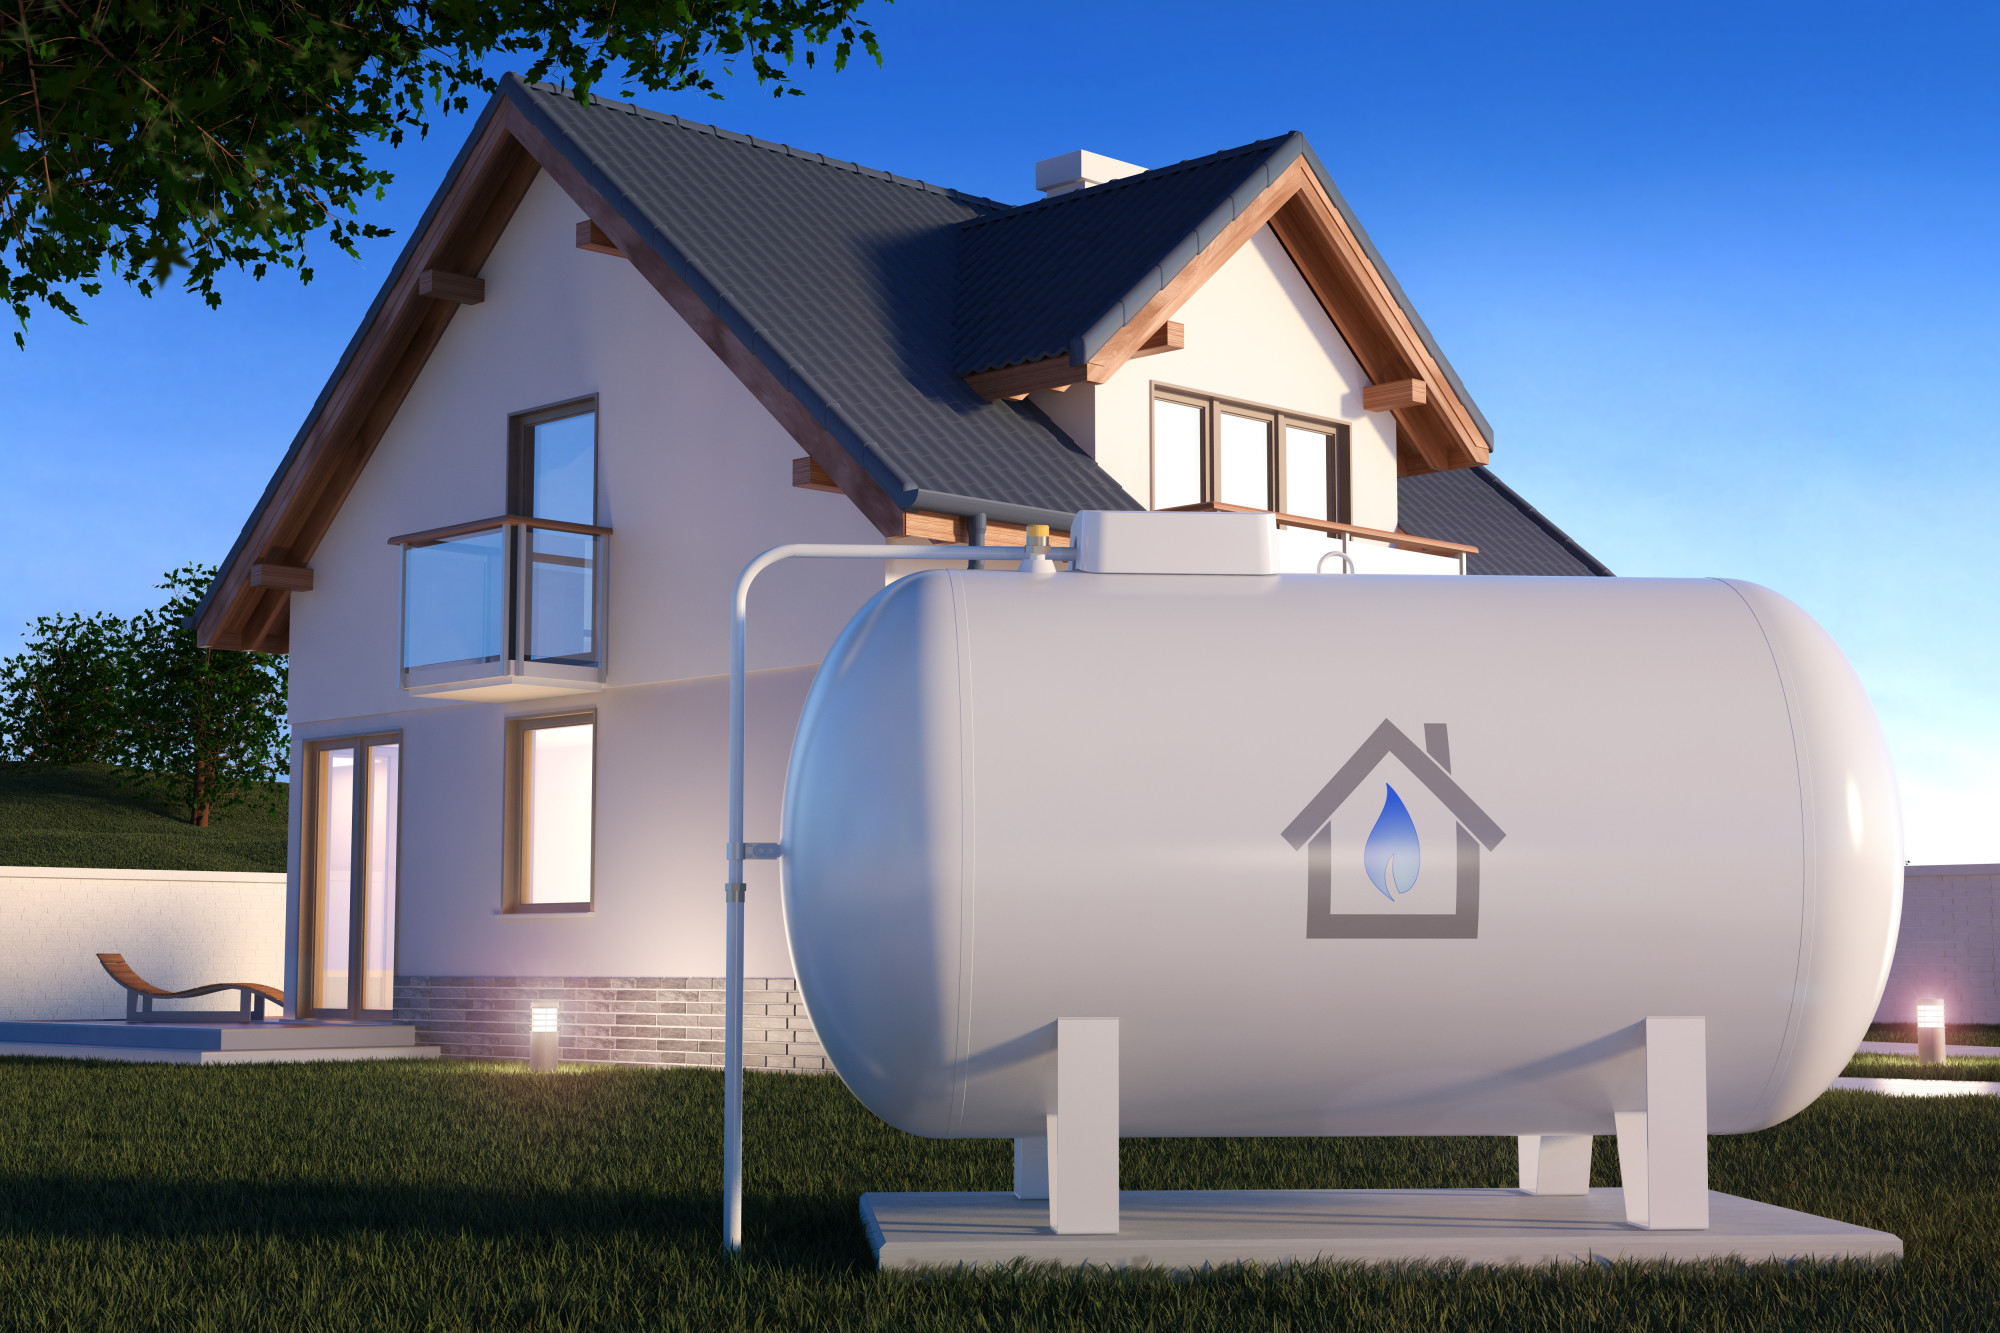 Finding the right propane tank for your needs requires knowing who can offer it. Here is everything to know about how to pick a propane gas company.